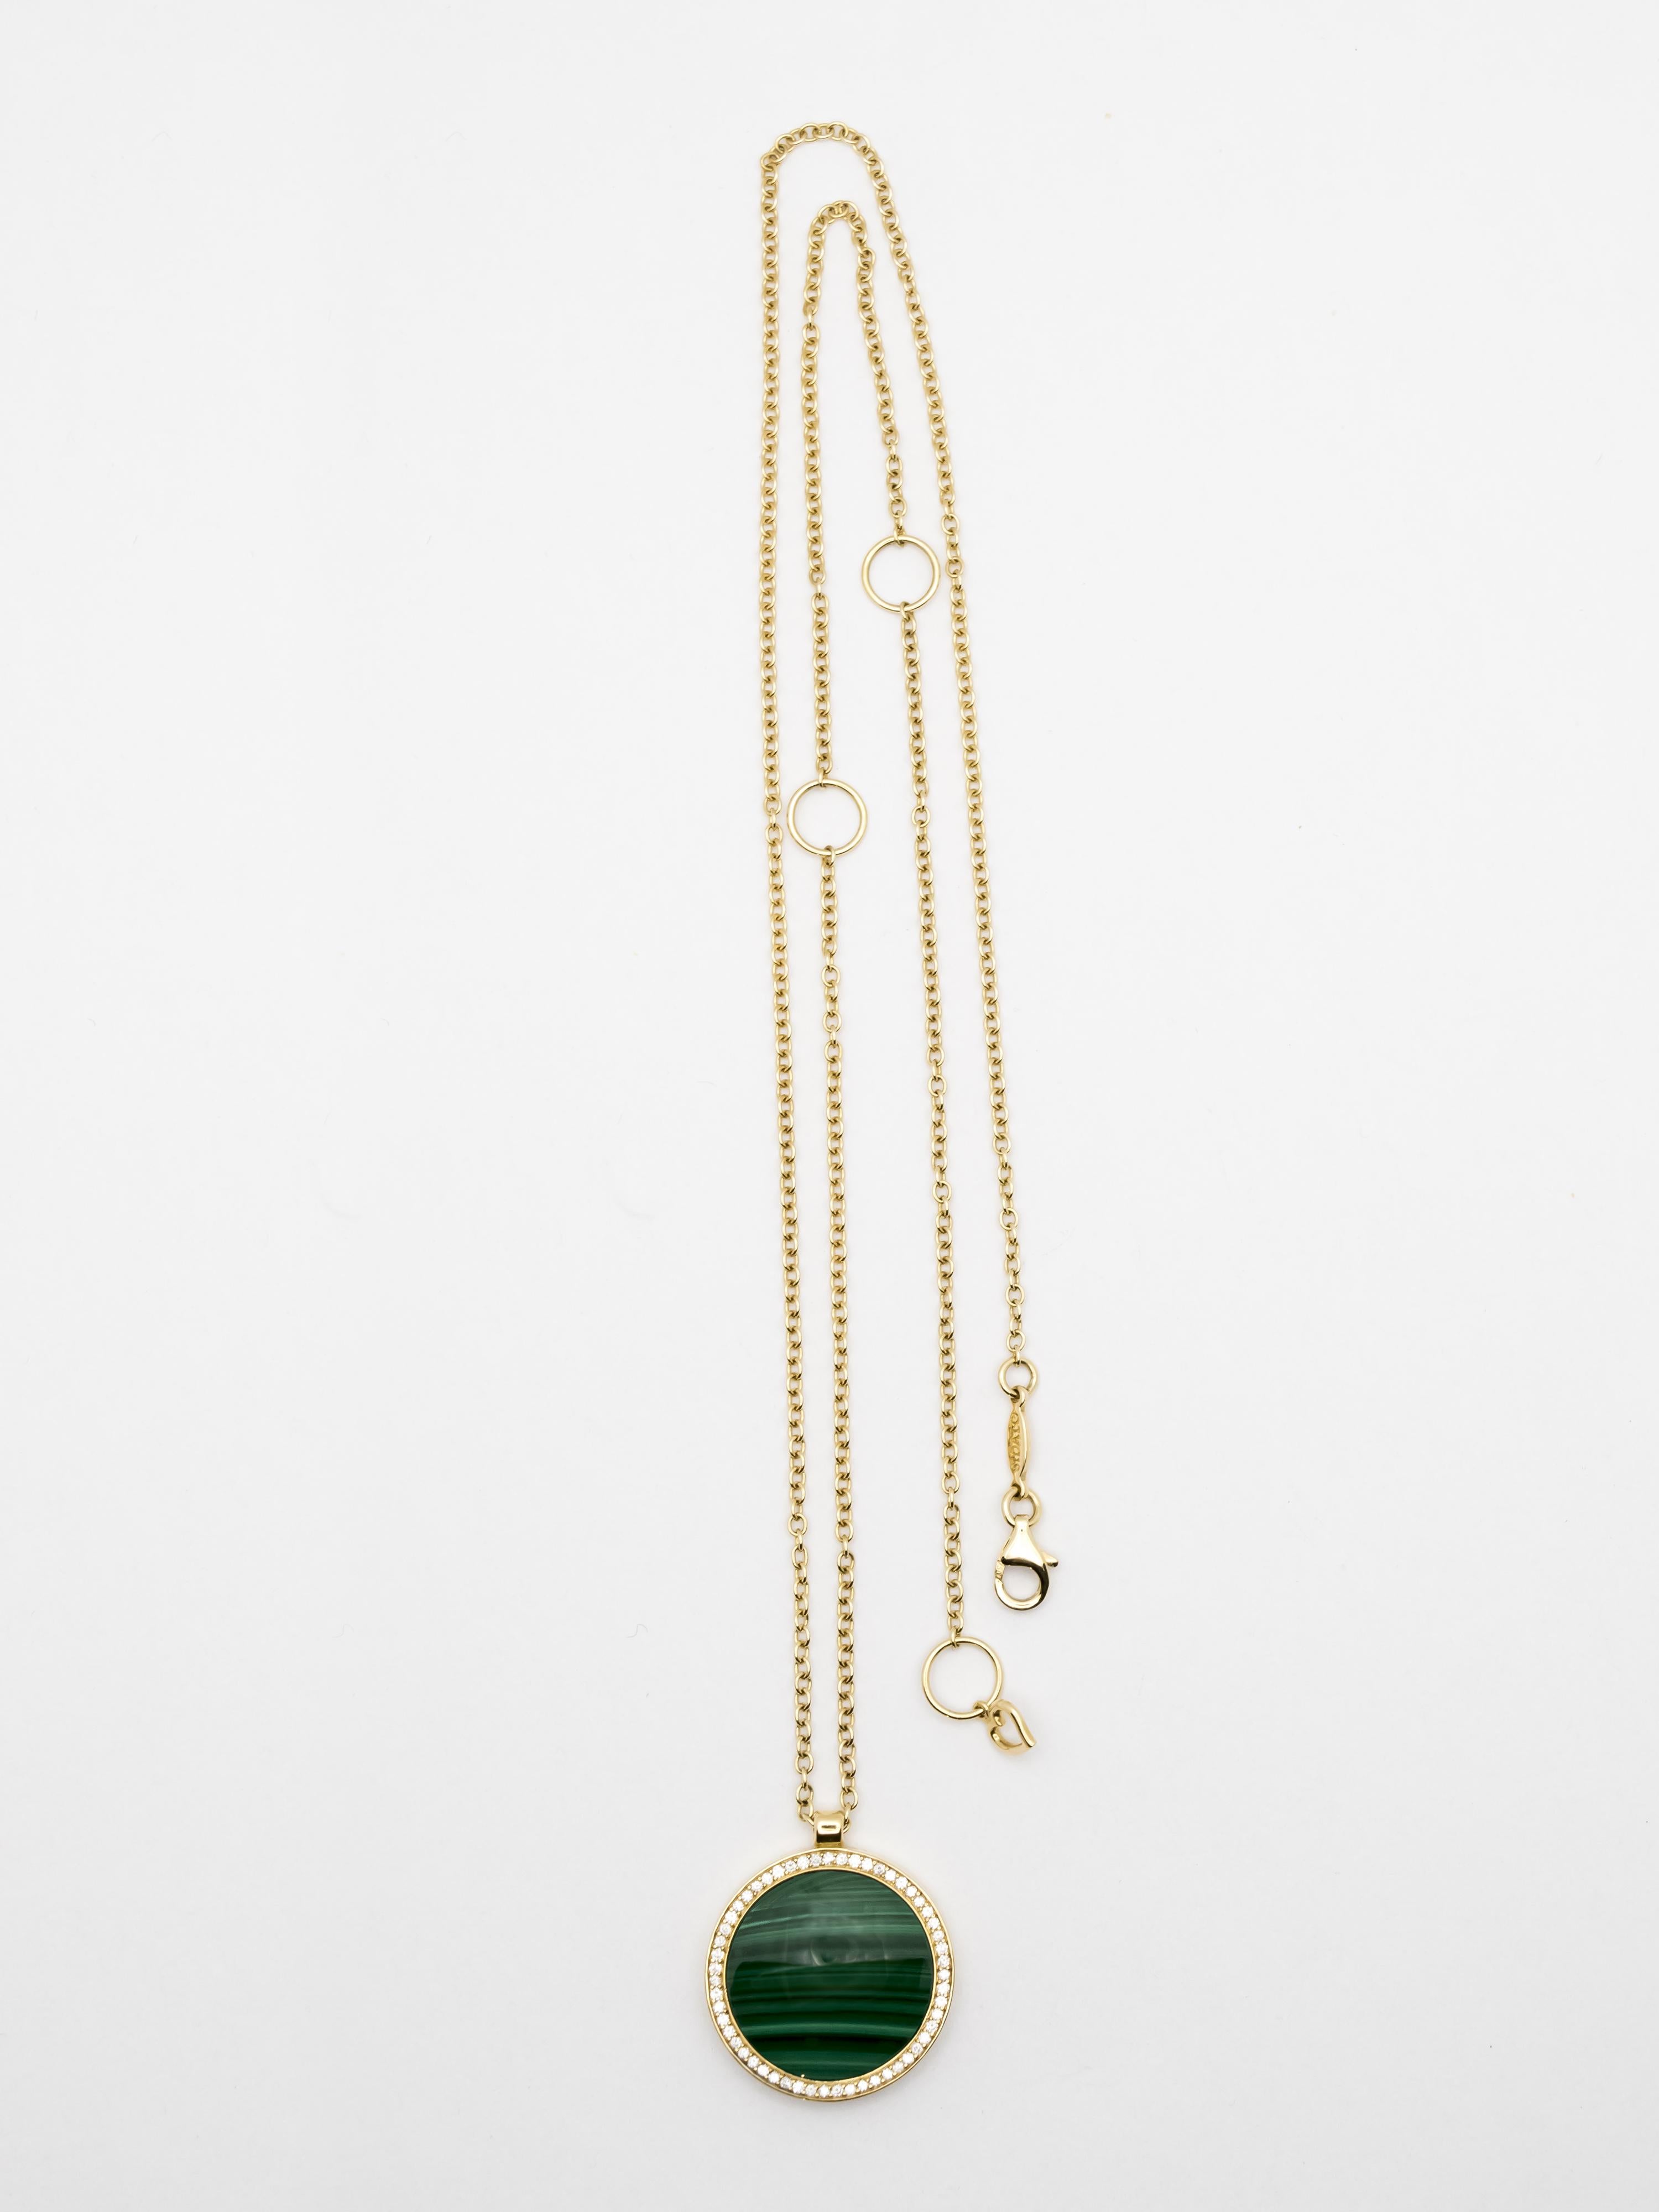 A beautiful 18 kt yellow gold necklace with yellow gold, malachite and diamond pendant.
This necklace has a chain link that is interspersed with three 70 mm diameter rings that function both as a decorative motif and to lengthen or shorten the